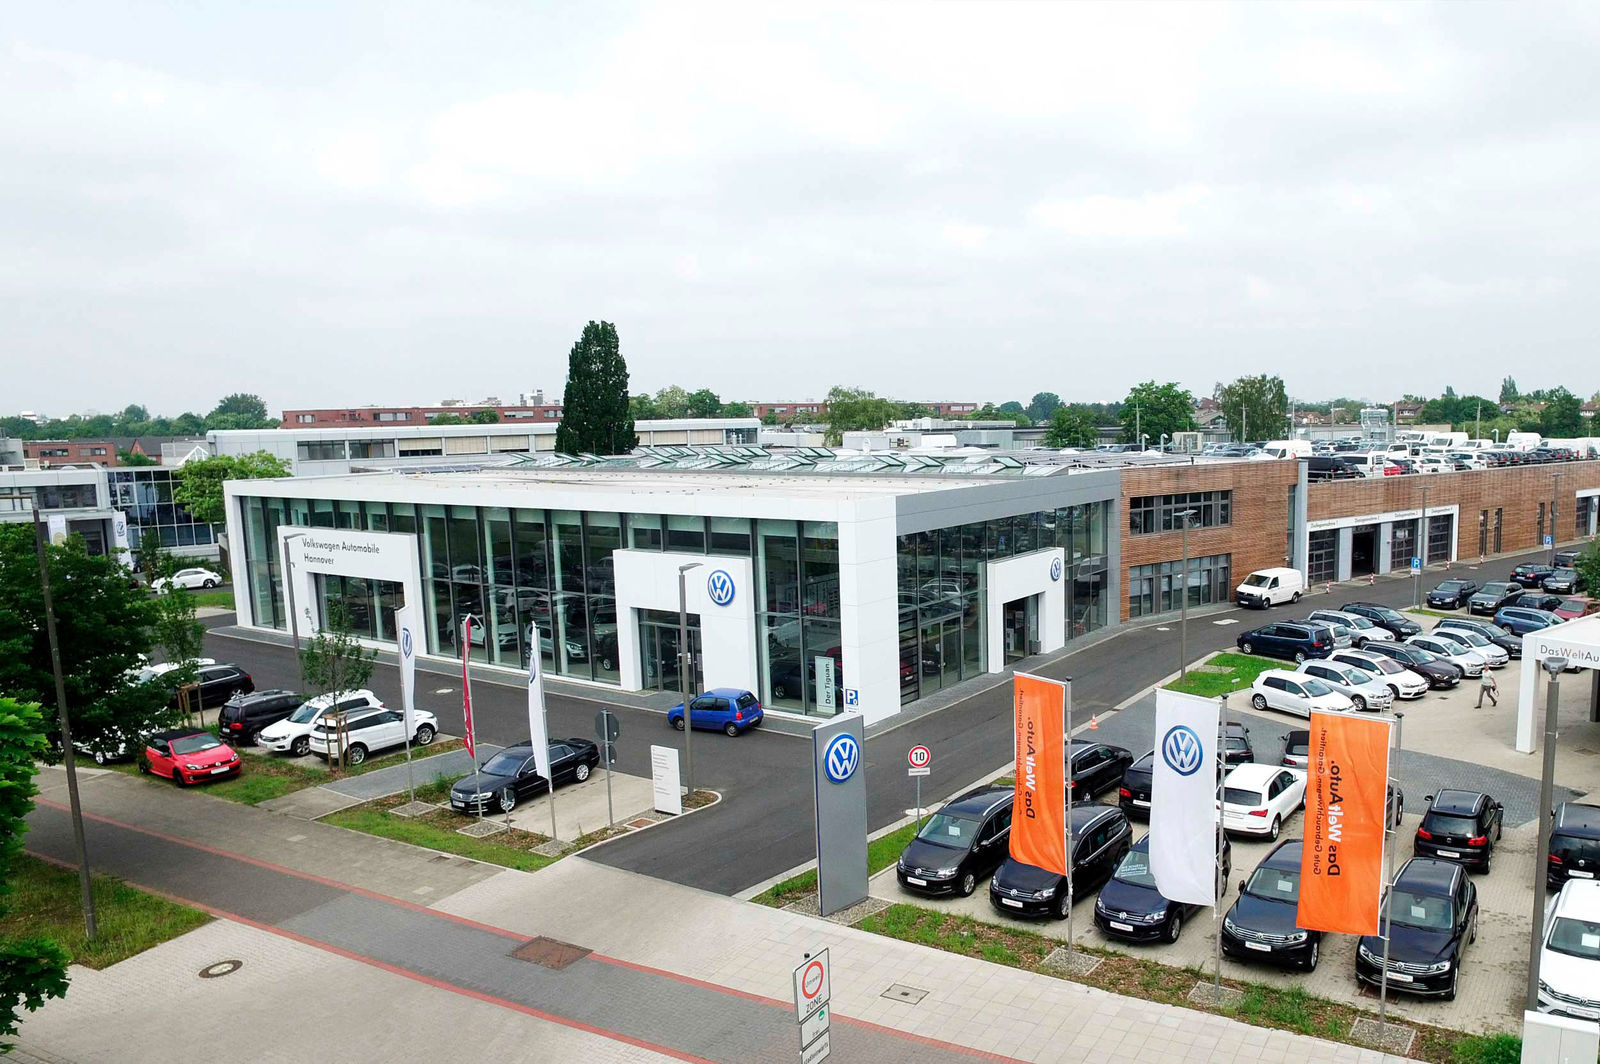 Story "Volkswagen reduces energy consumption at car dealerships"